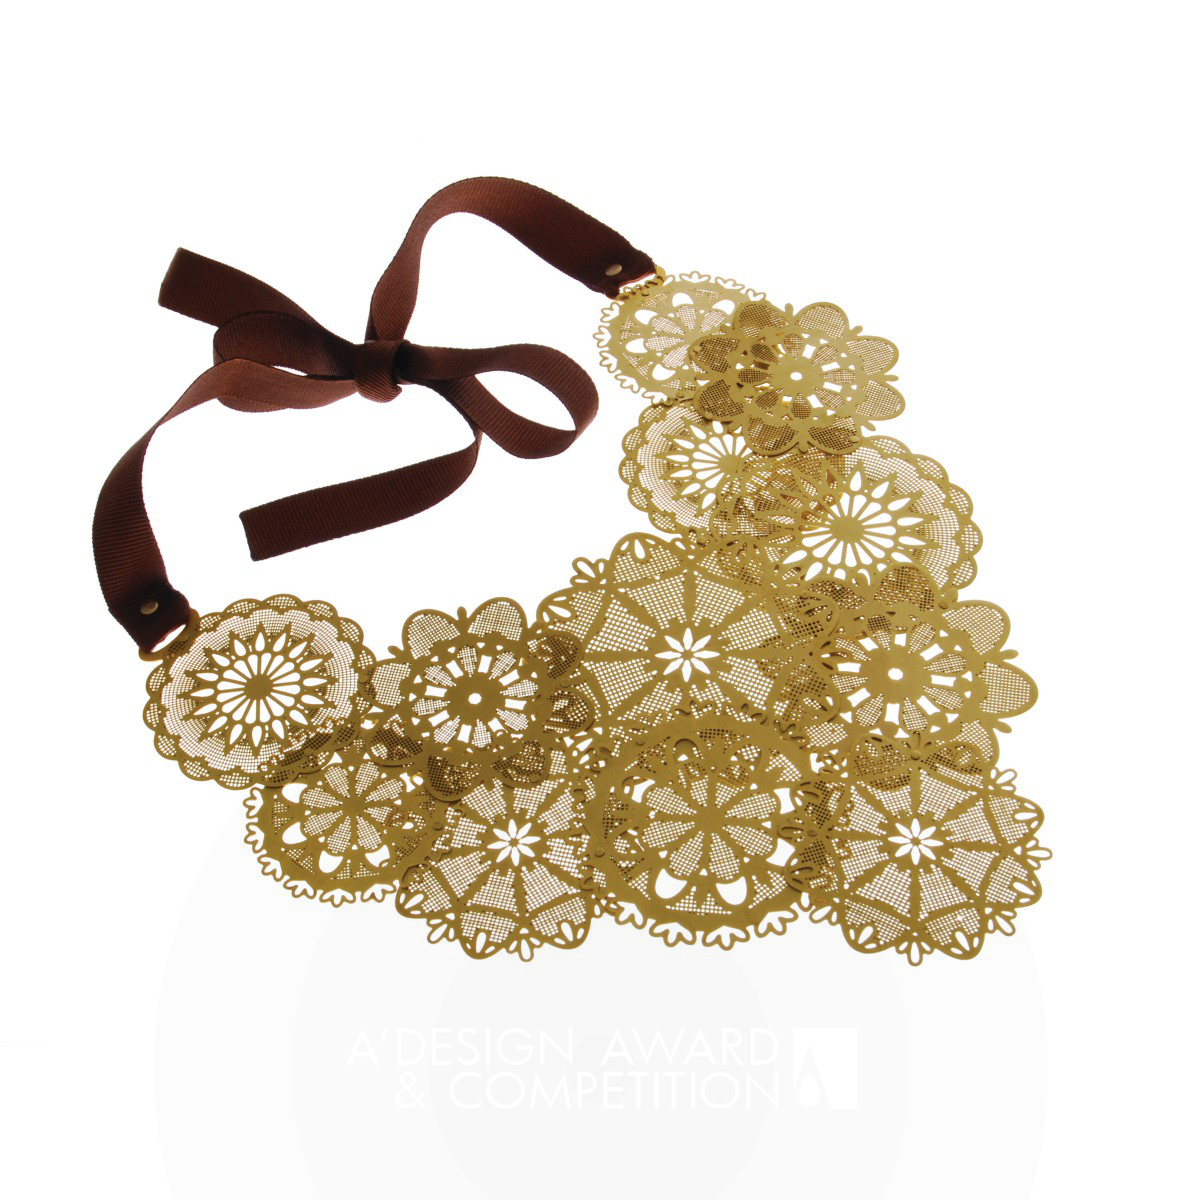 Crocheted Necklace by Camilla Marcondes Iron Jewelry Design Award Winner 2020 